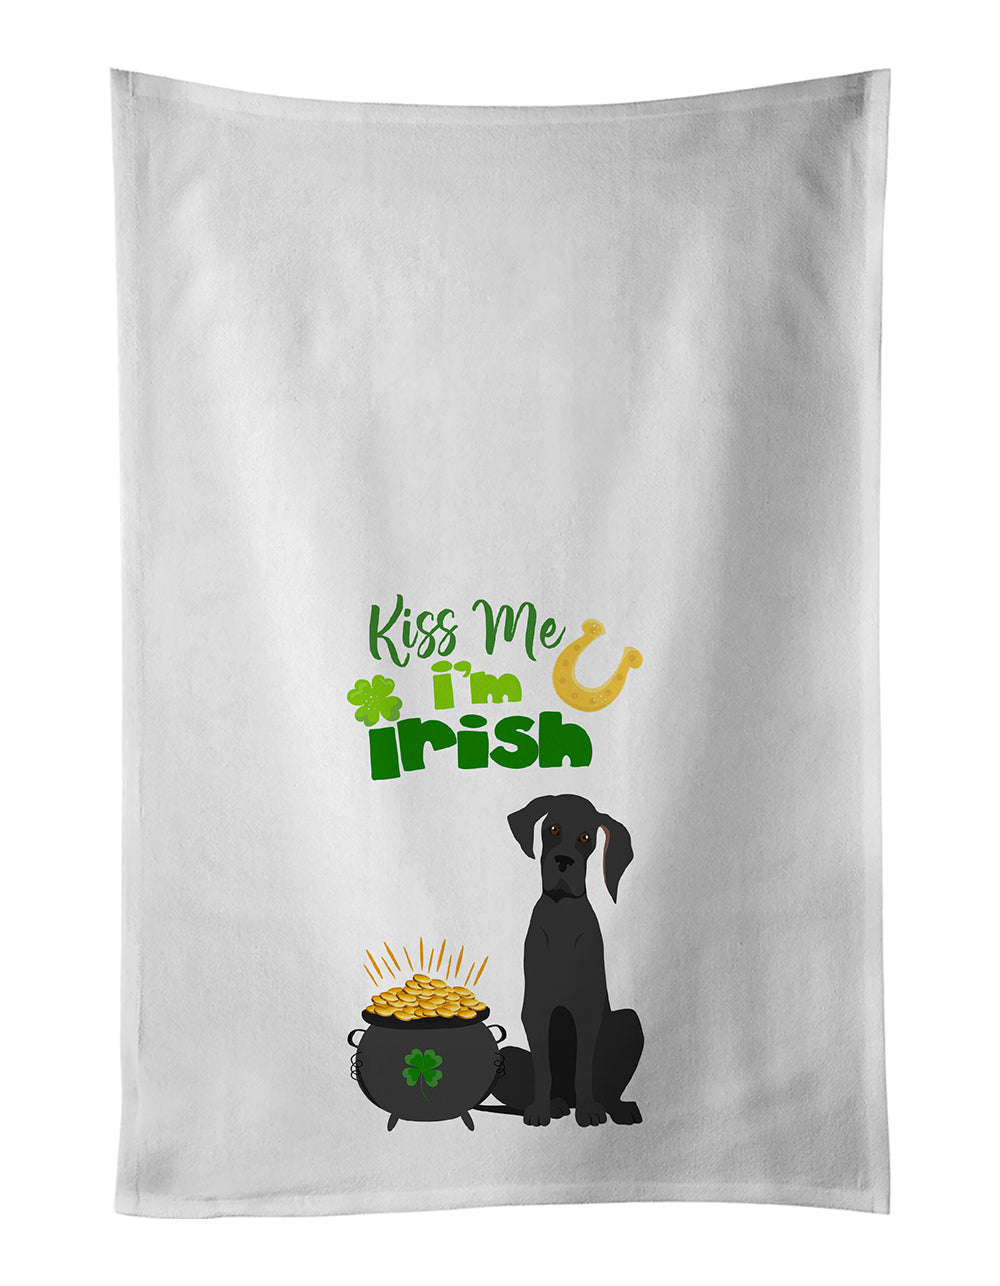 Buy this Black Great Dane St. Patrick's Day White Kitchen Towel Set of 2 Dish Towels